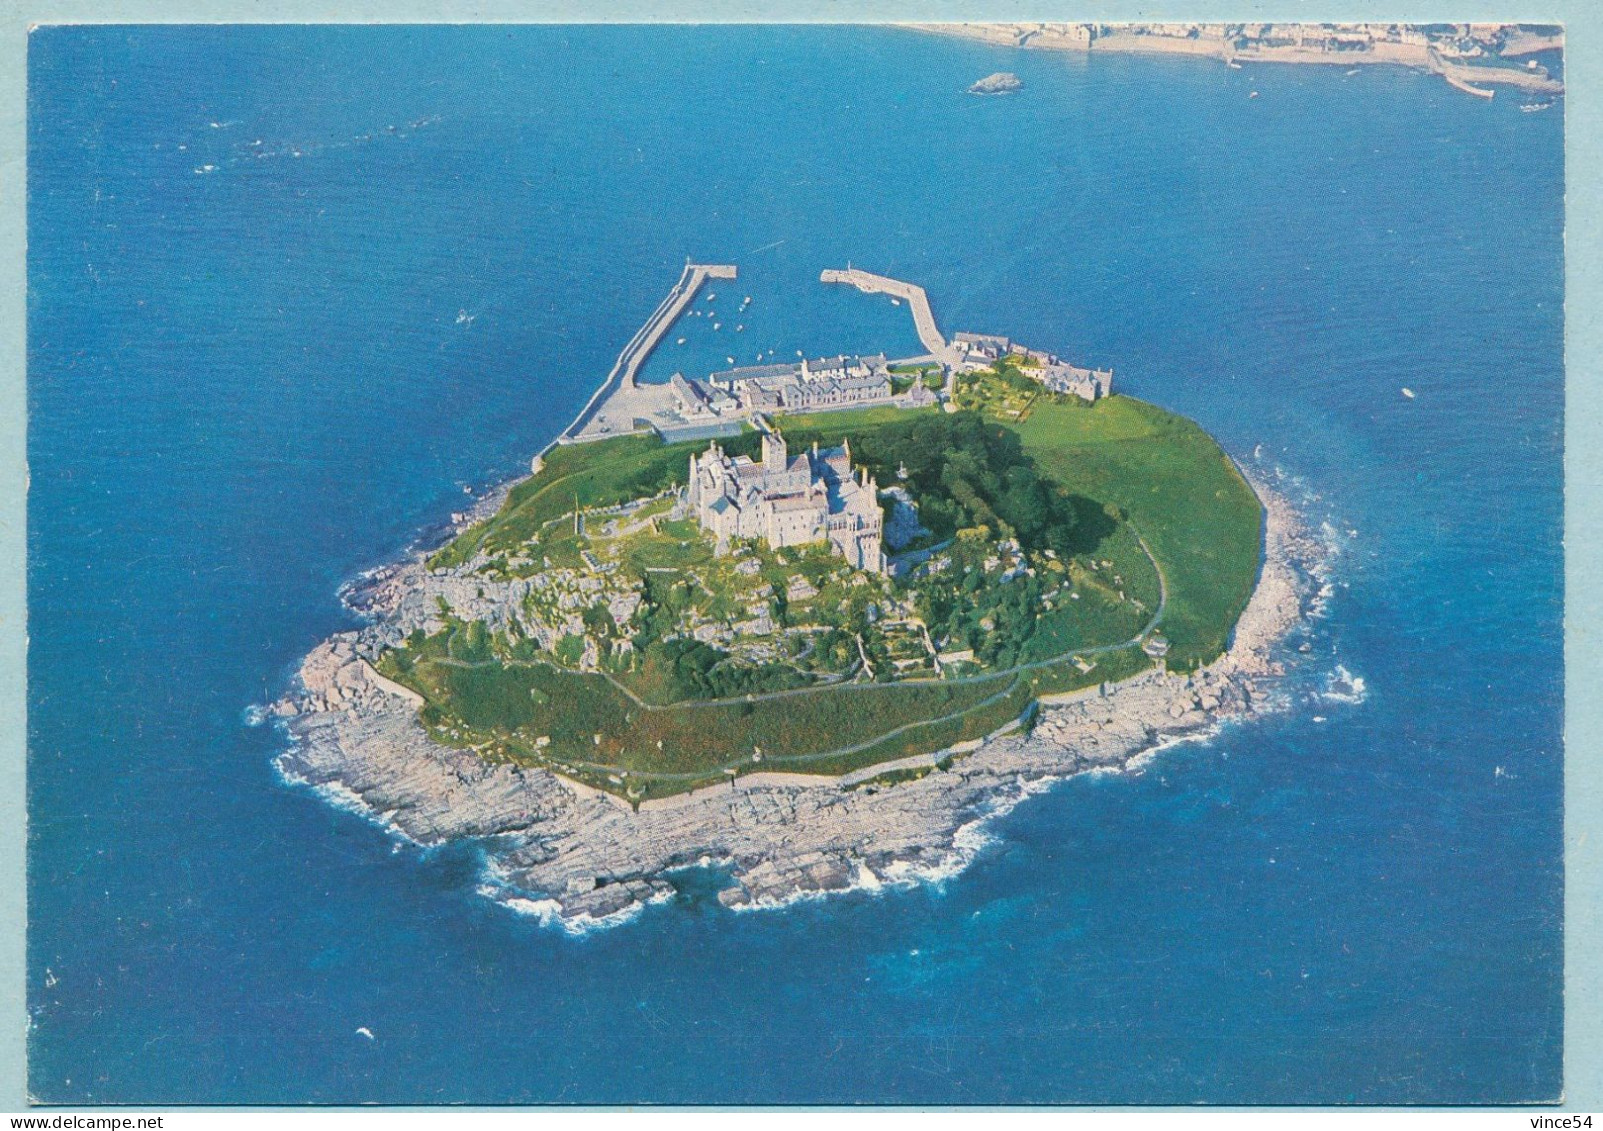 Aerial View Of St. Michael's Mount - Cornwall - St Michael's Mount